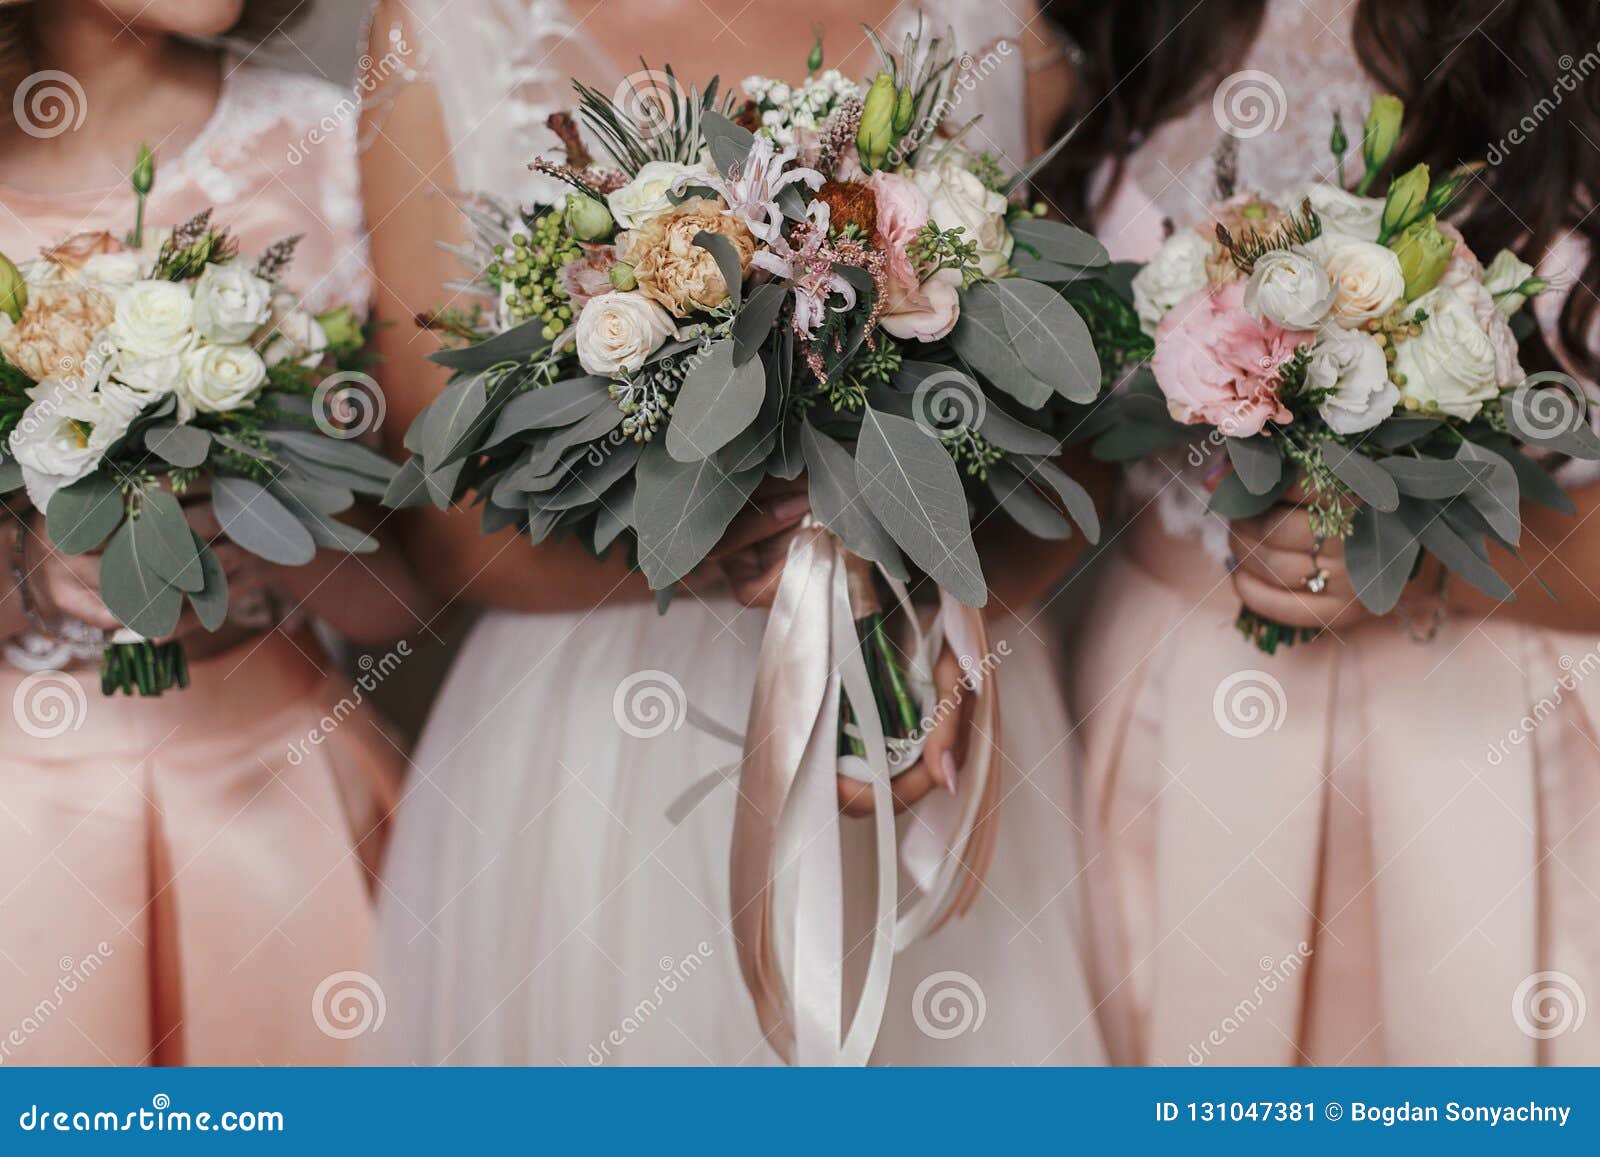 bridesmaids and bride holding modern wedding bouquets of pink roses and green eucalyptus with pink ribbons. stylish contemporary